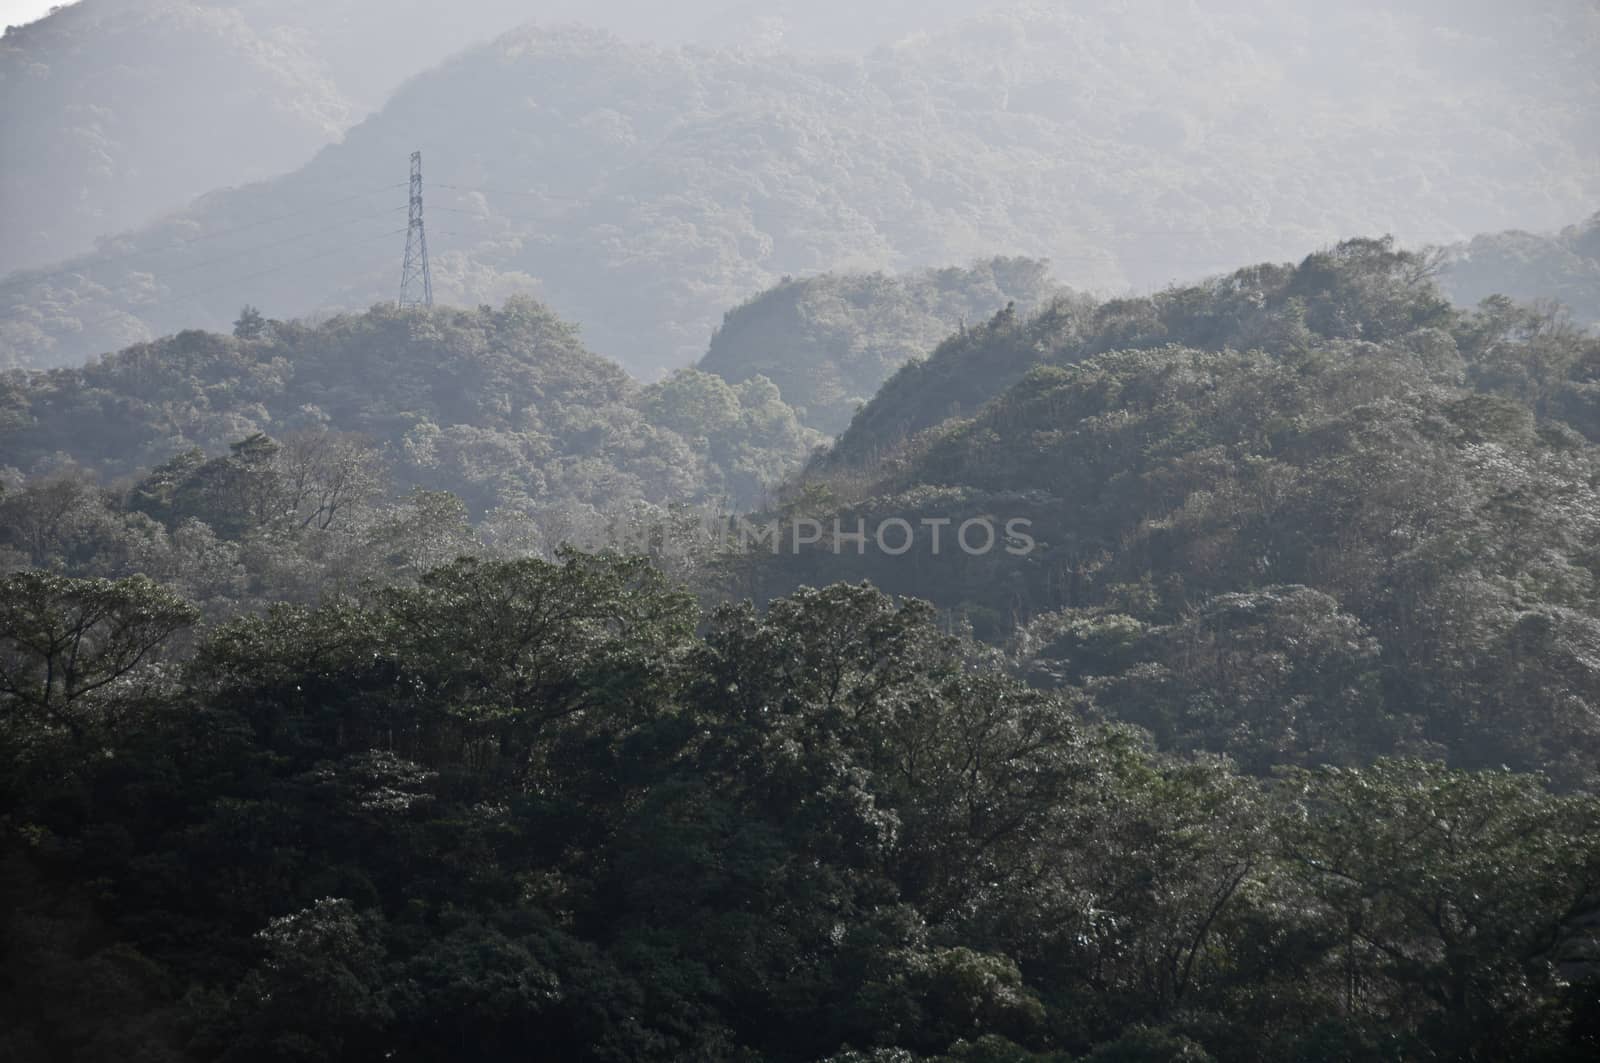 Electricity tower in deep forest by eyeofpaul